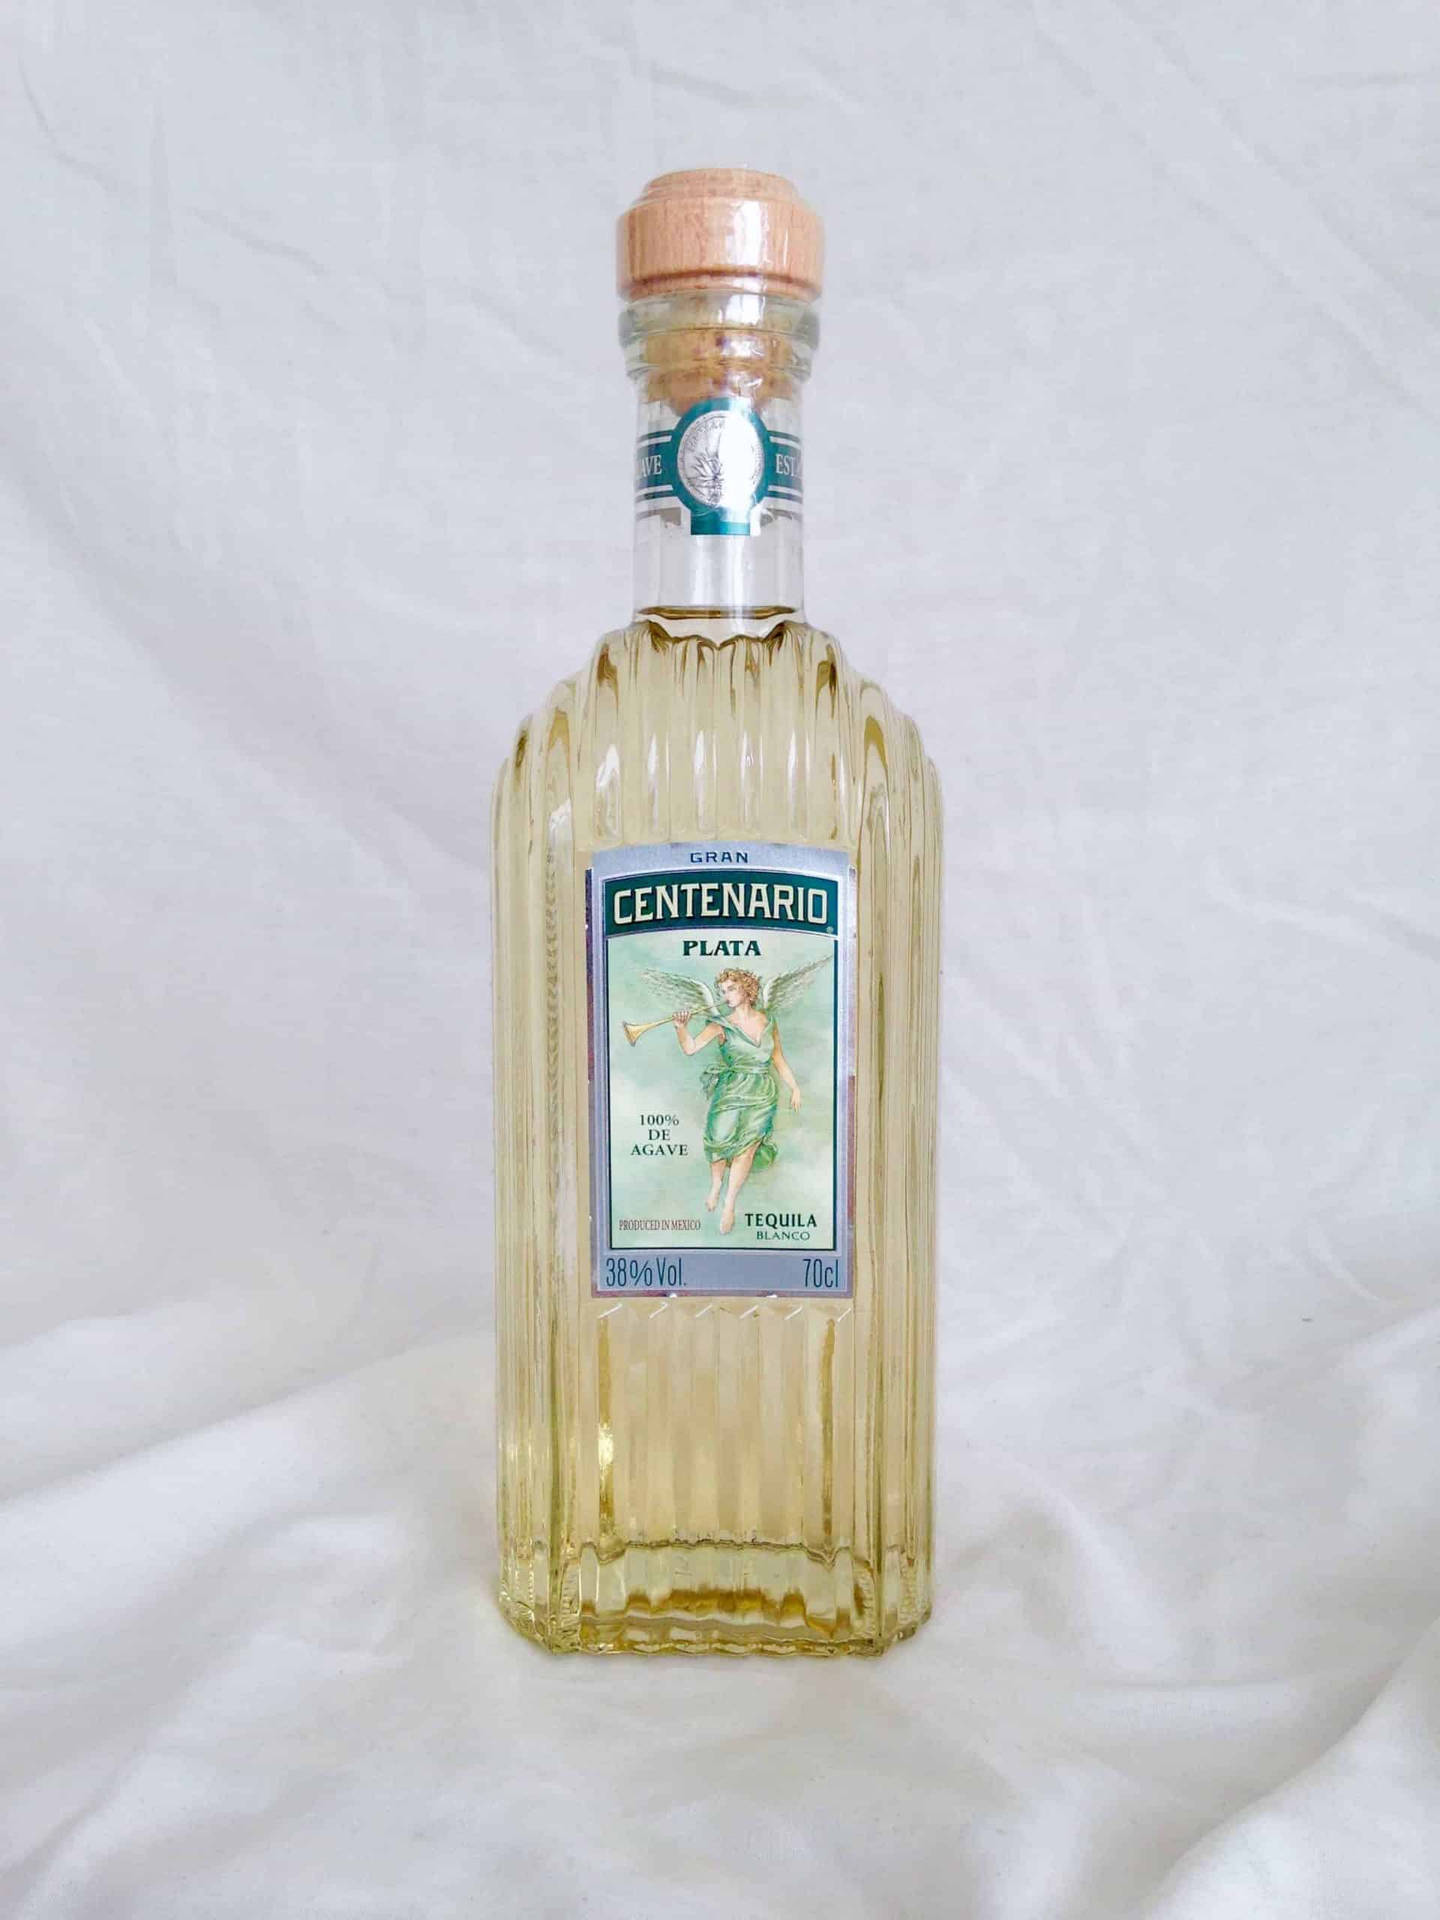 Grancentenario Tequila Plata Em Pano Branco - This Doesn't Really Make Sense In Portuguese, As It's Just A Description Of A Product. However, If We Are Referring To It As A Wallpaper, It Could Be: 